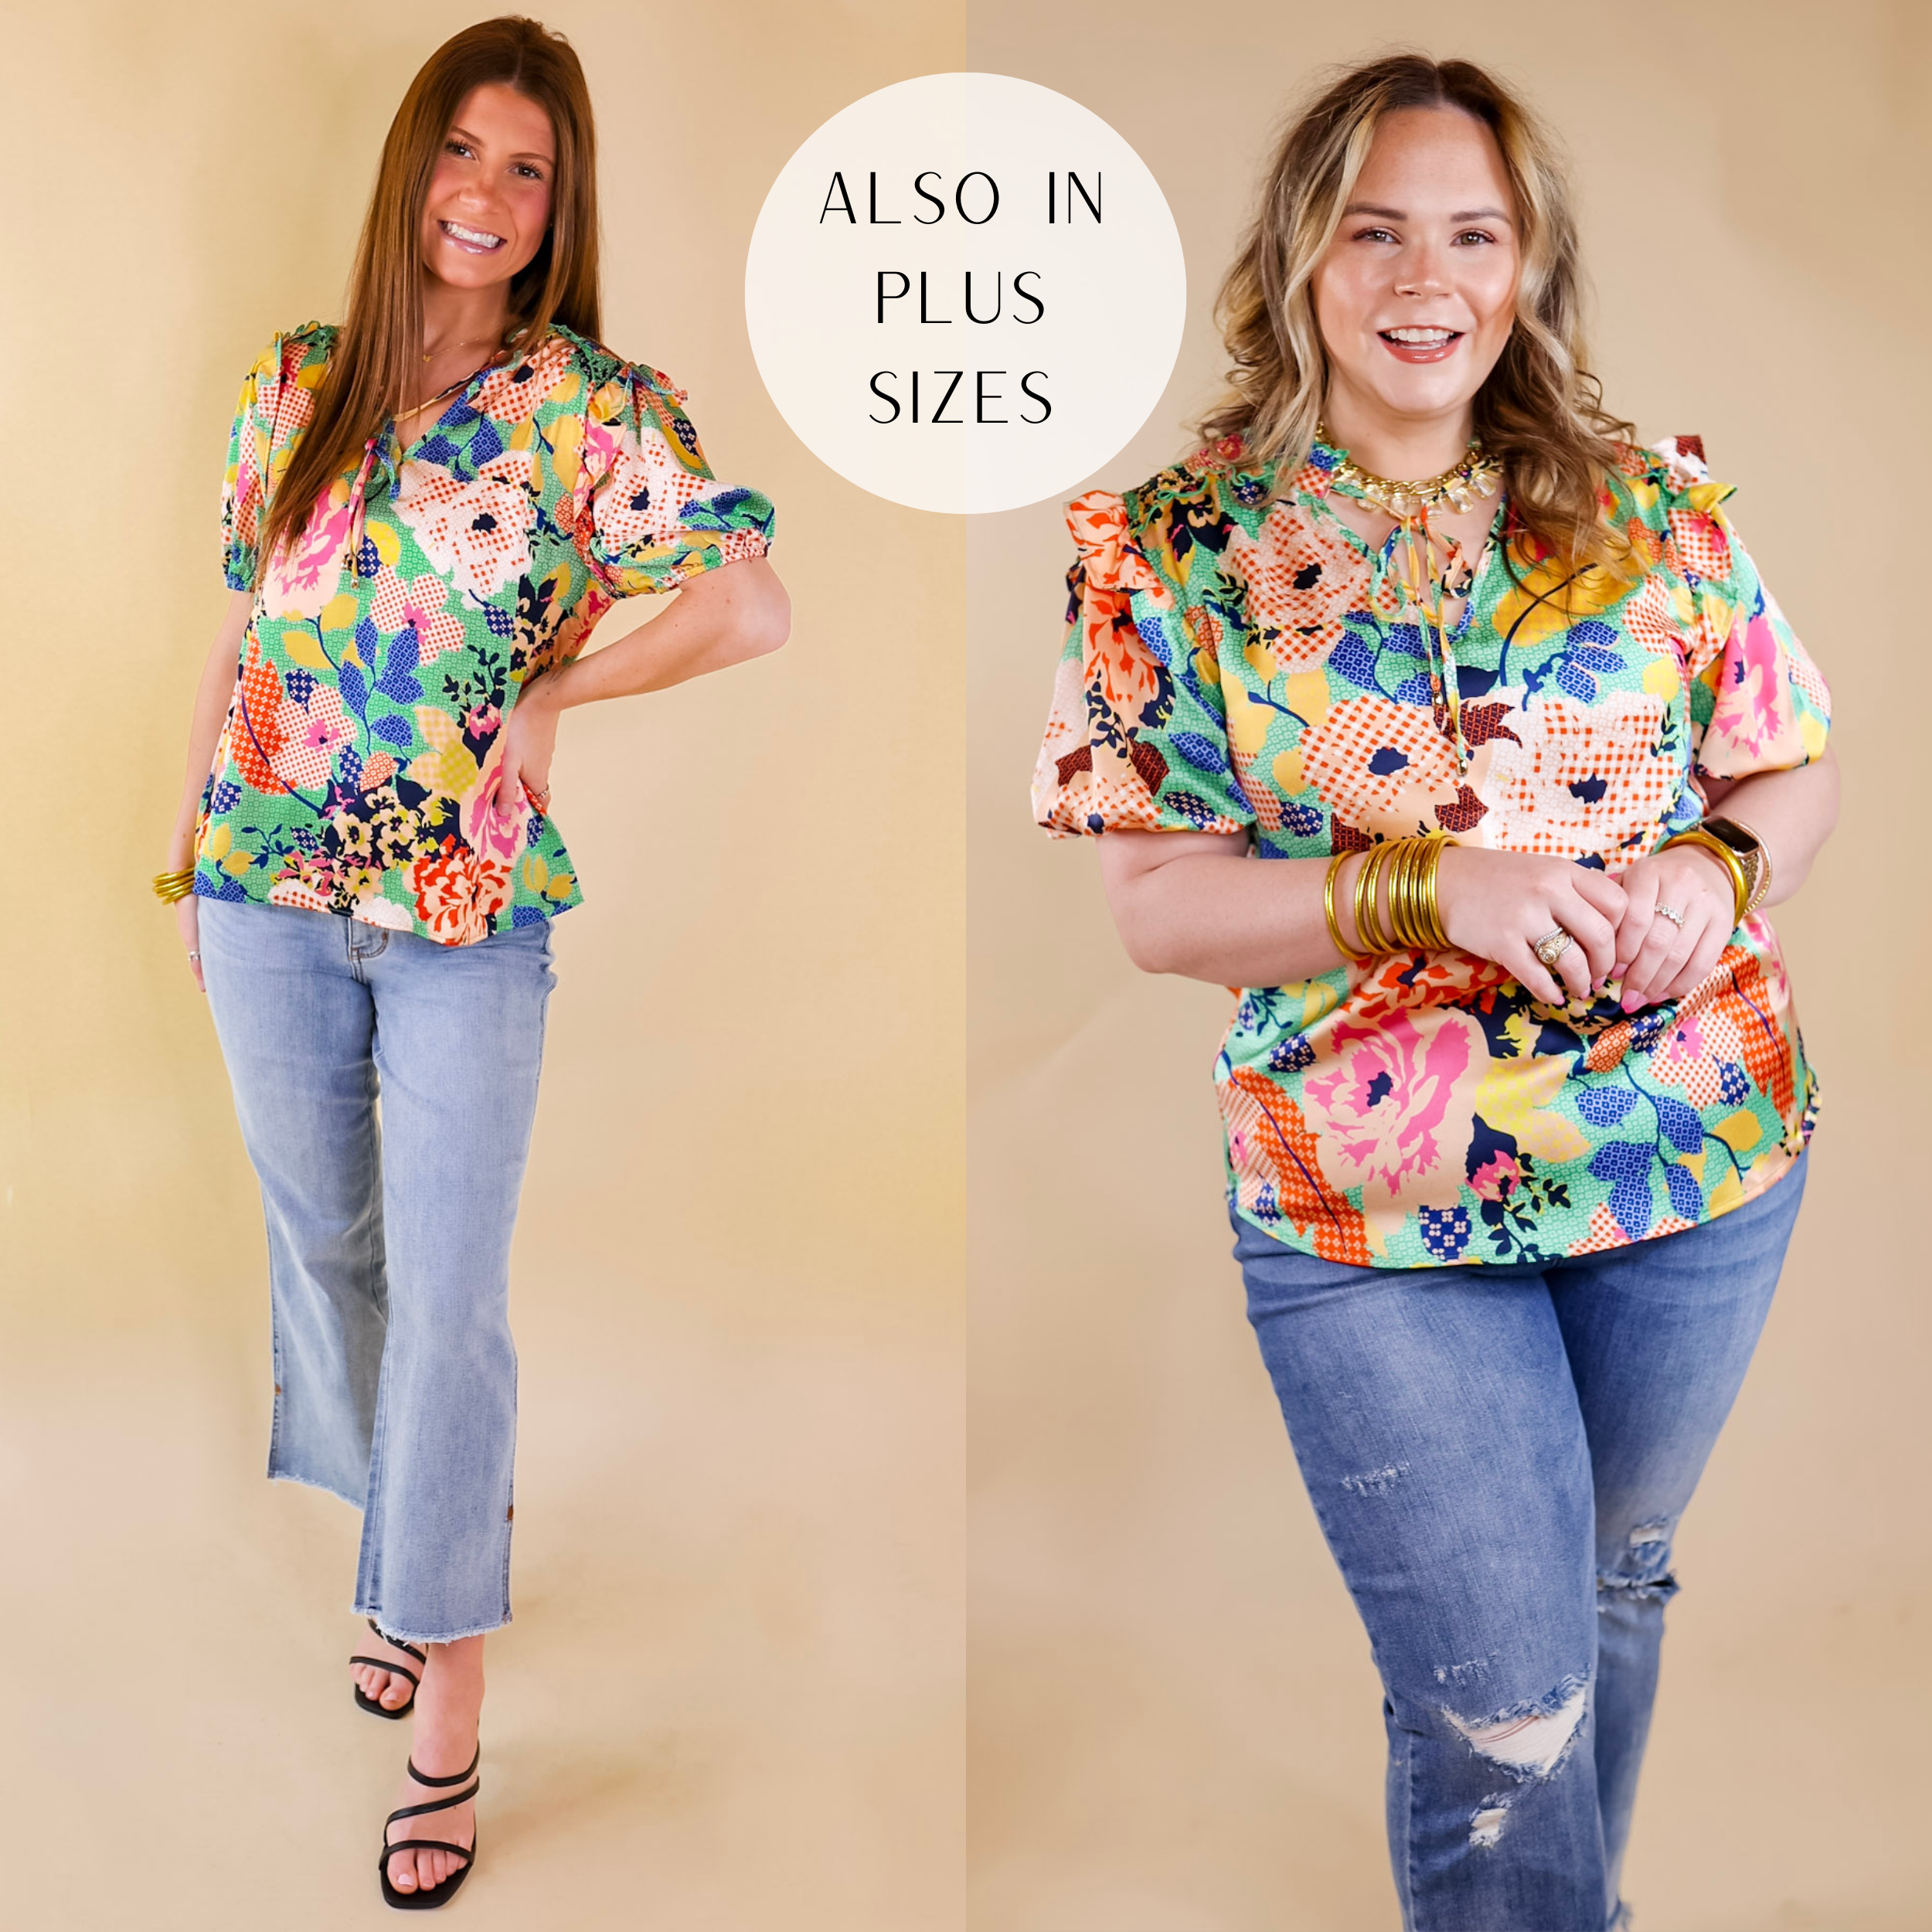 Models are wearing a floral print top with a keyhole and tie neckline, short balloon sleeves, and smocked detailing on the shoulders. Size small model has it paired with light wash jeans, black heels, and gold jewelry. Size large model has it paired with distressed jeans and gold jewelry.